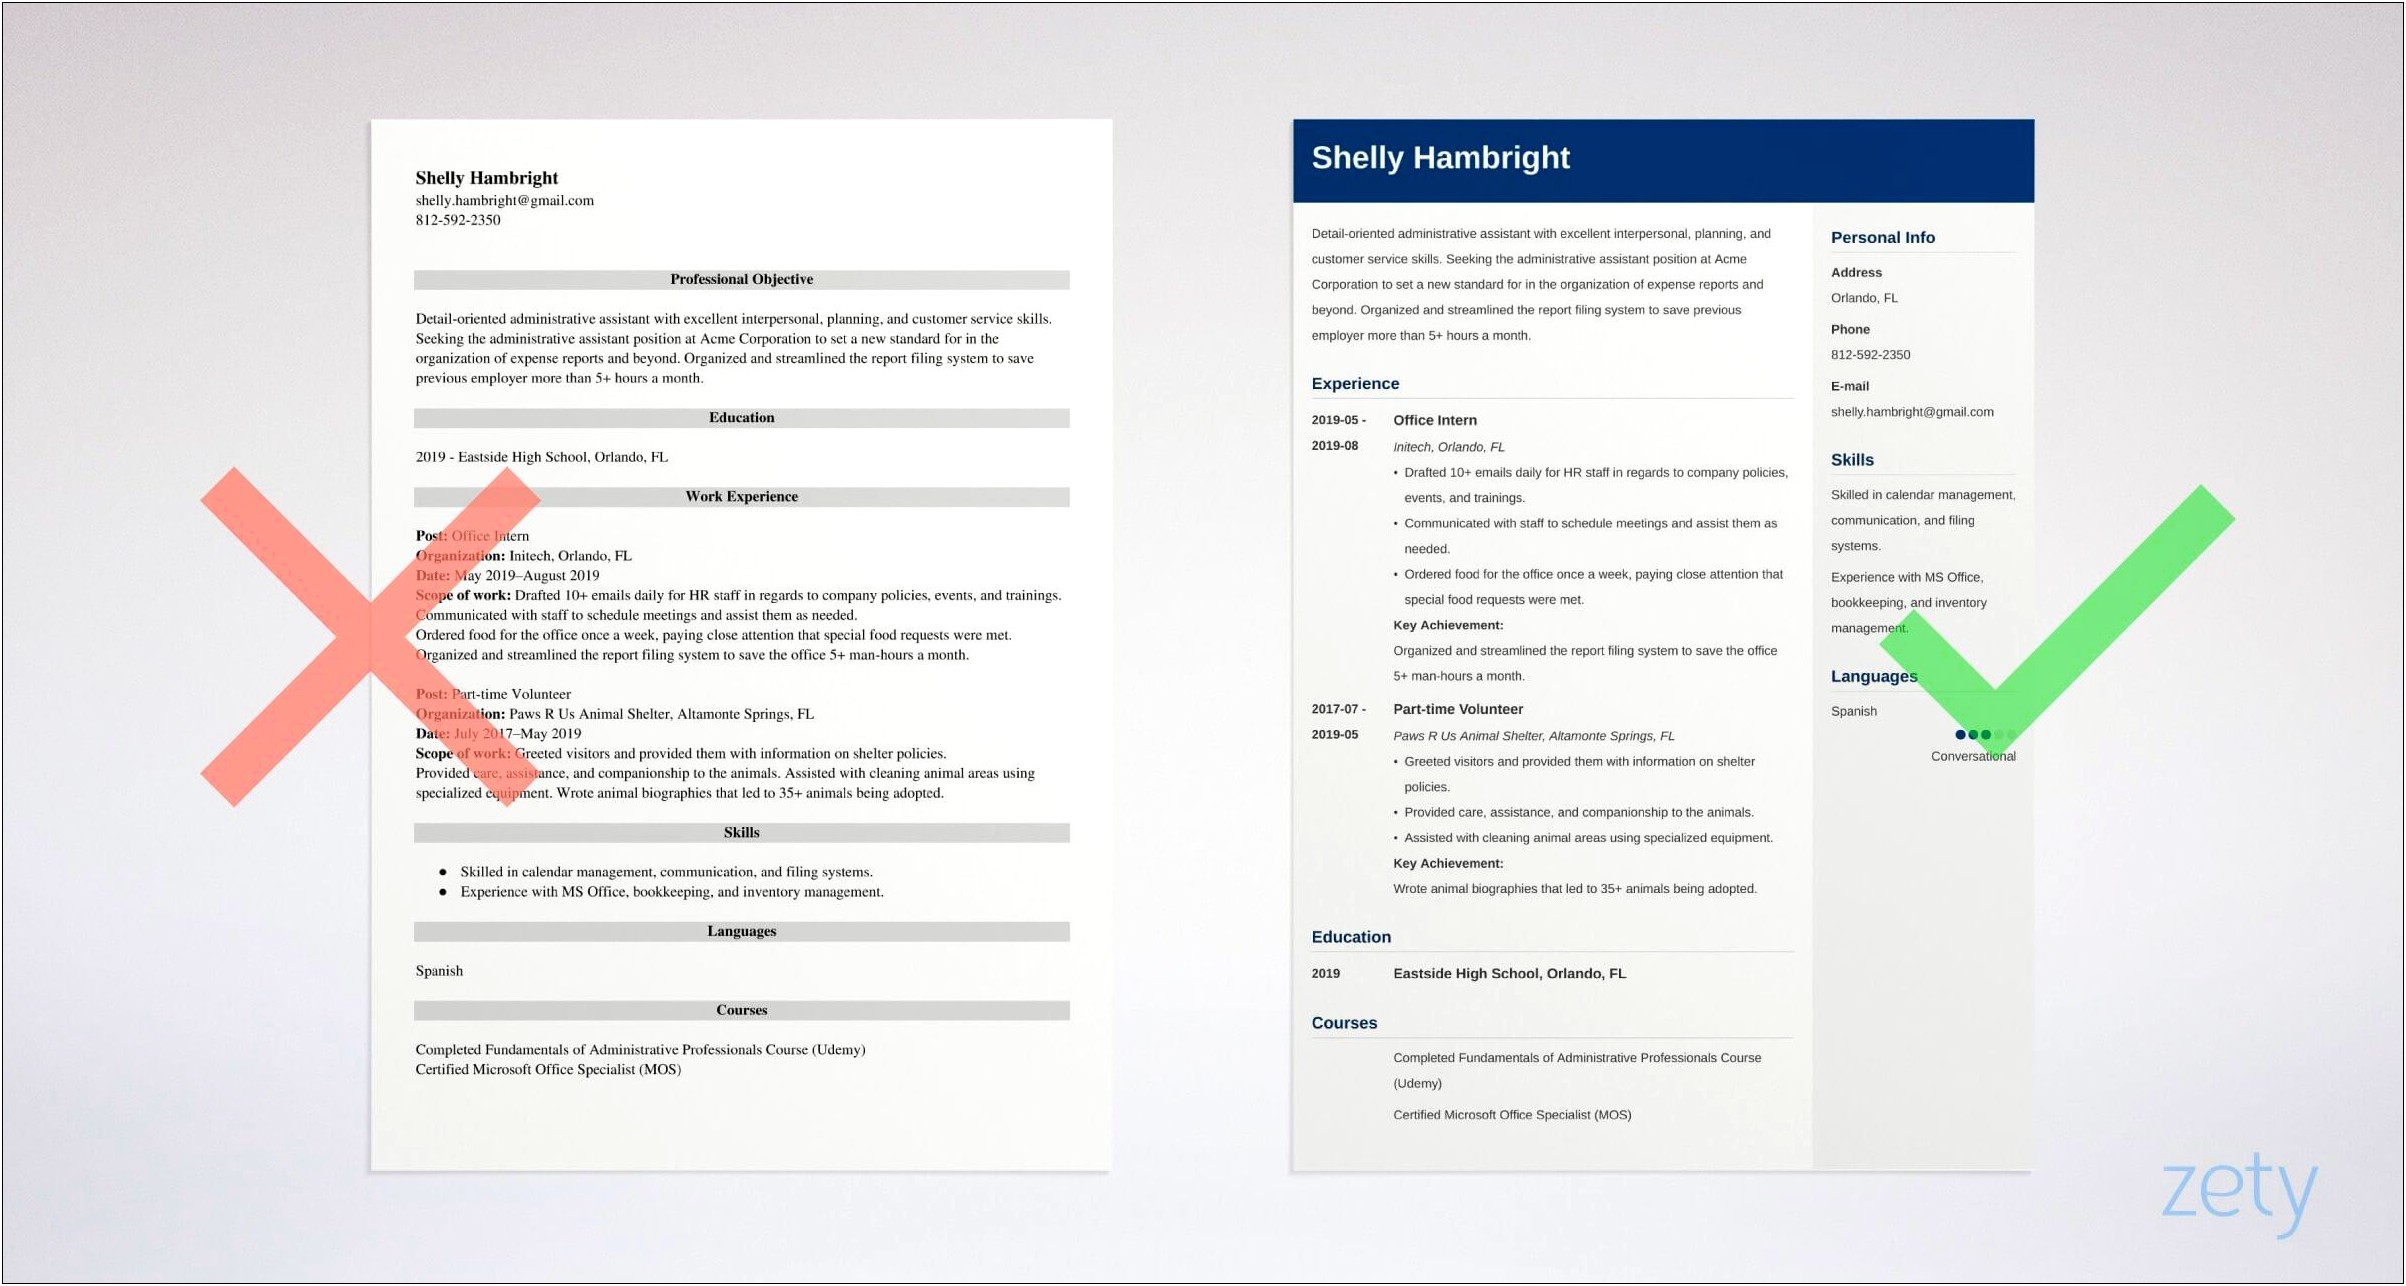 Sample Resume For Microsoft Office Specialist